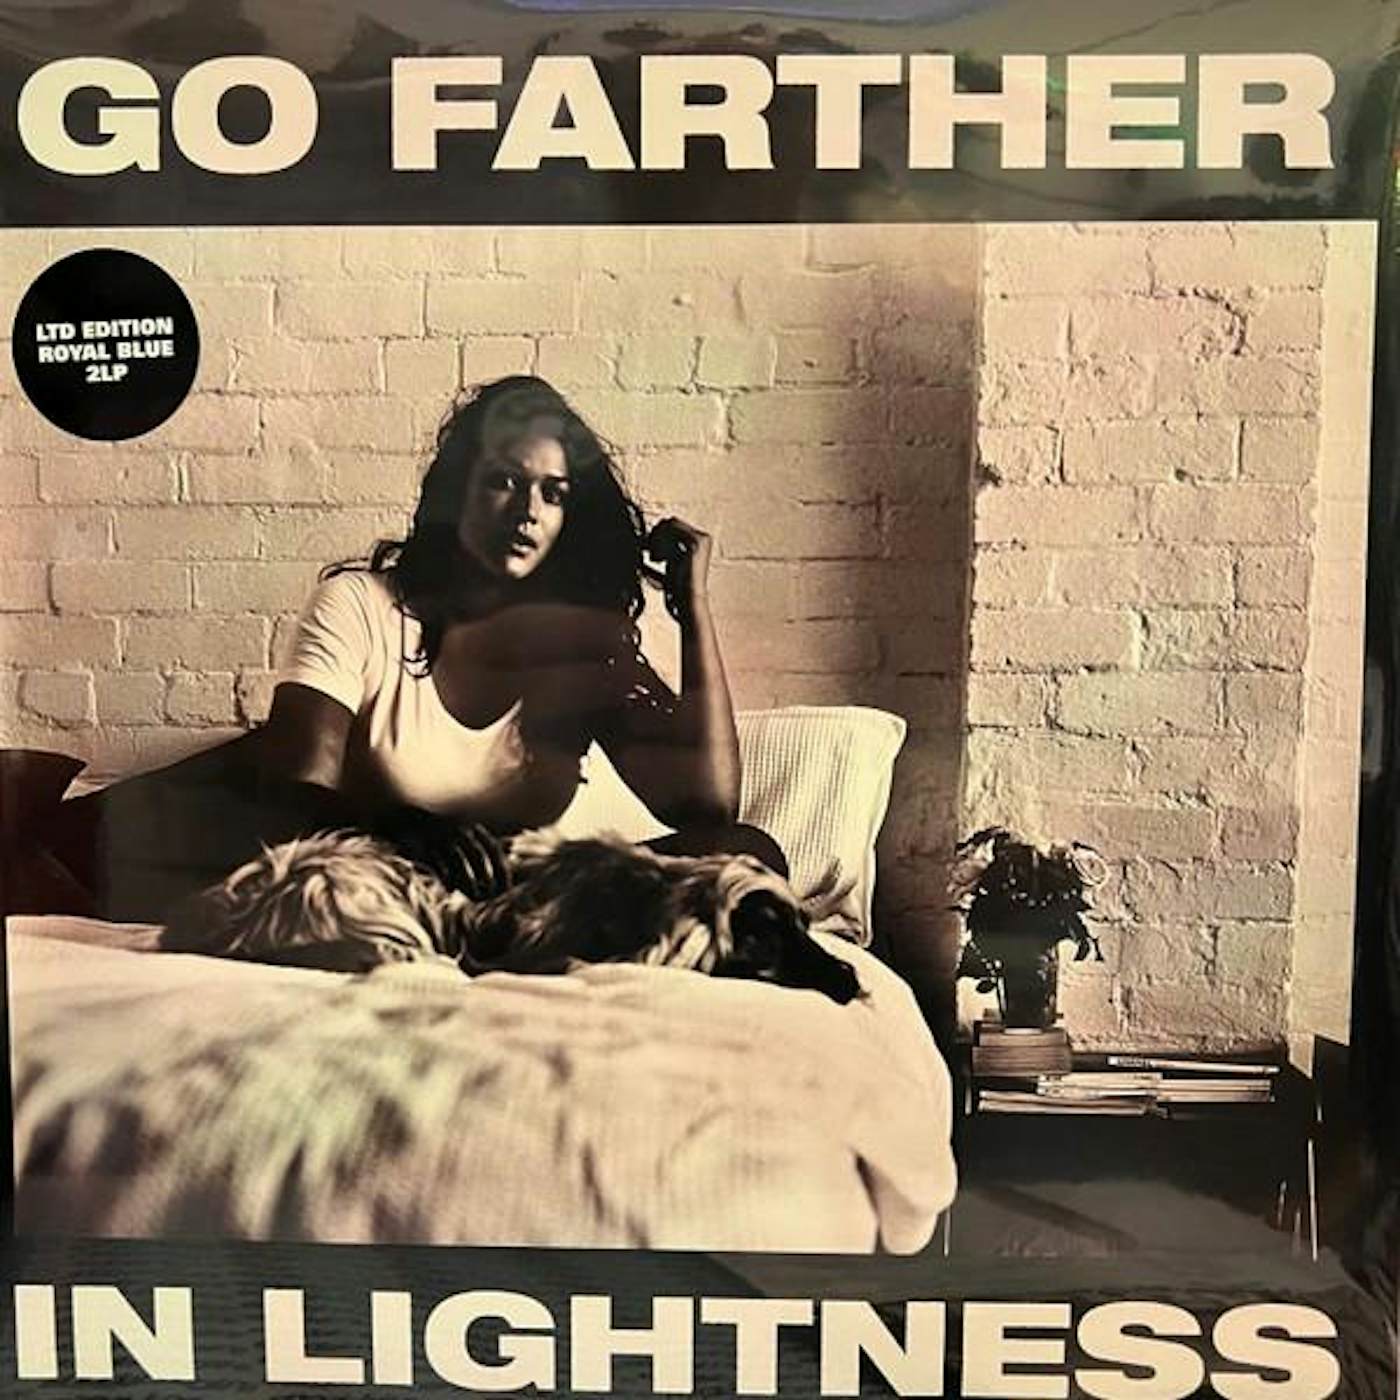 Gang of Youths GO FARTHER IN LIGHTNESS Vinyl Record